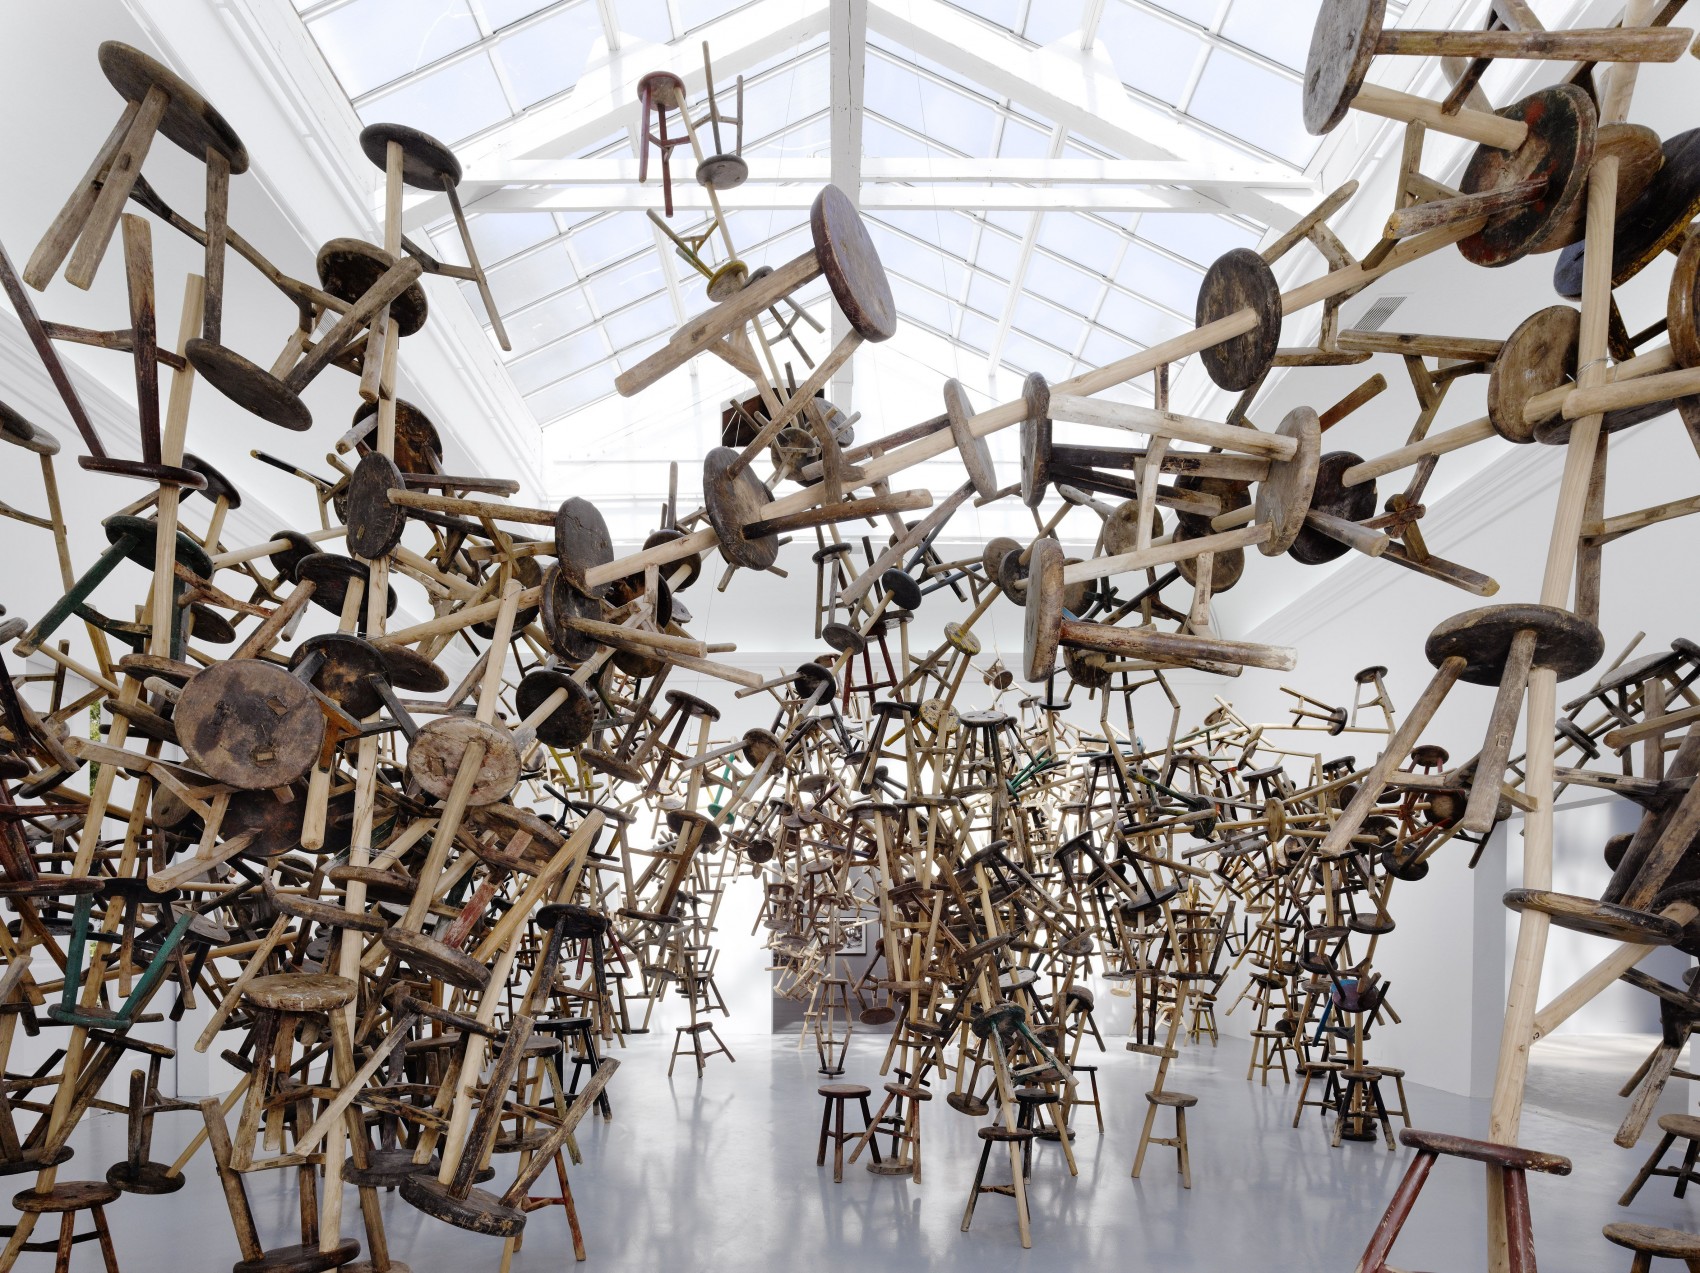 Ai Wei Wei Bang, 2013 ©Roman Mensing in cooperation with Thorsten Arendt, artdoc.de